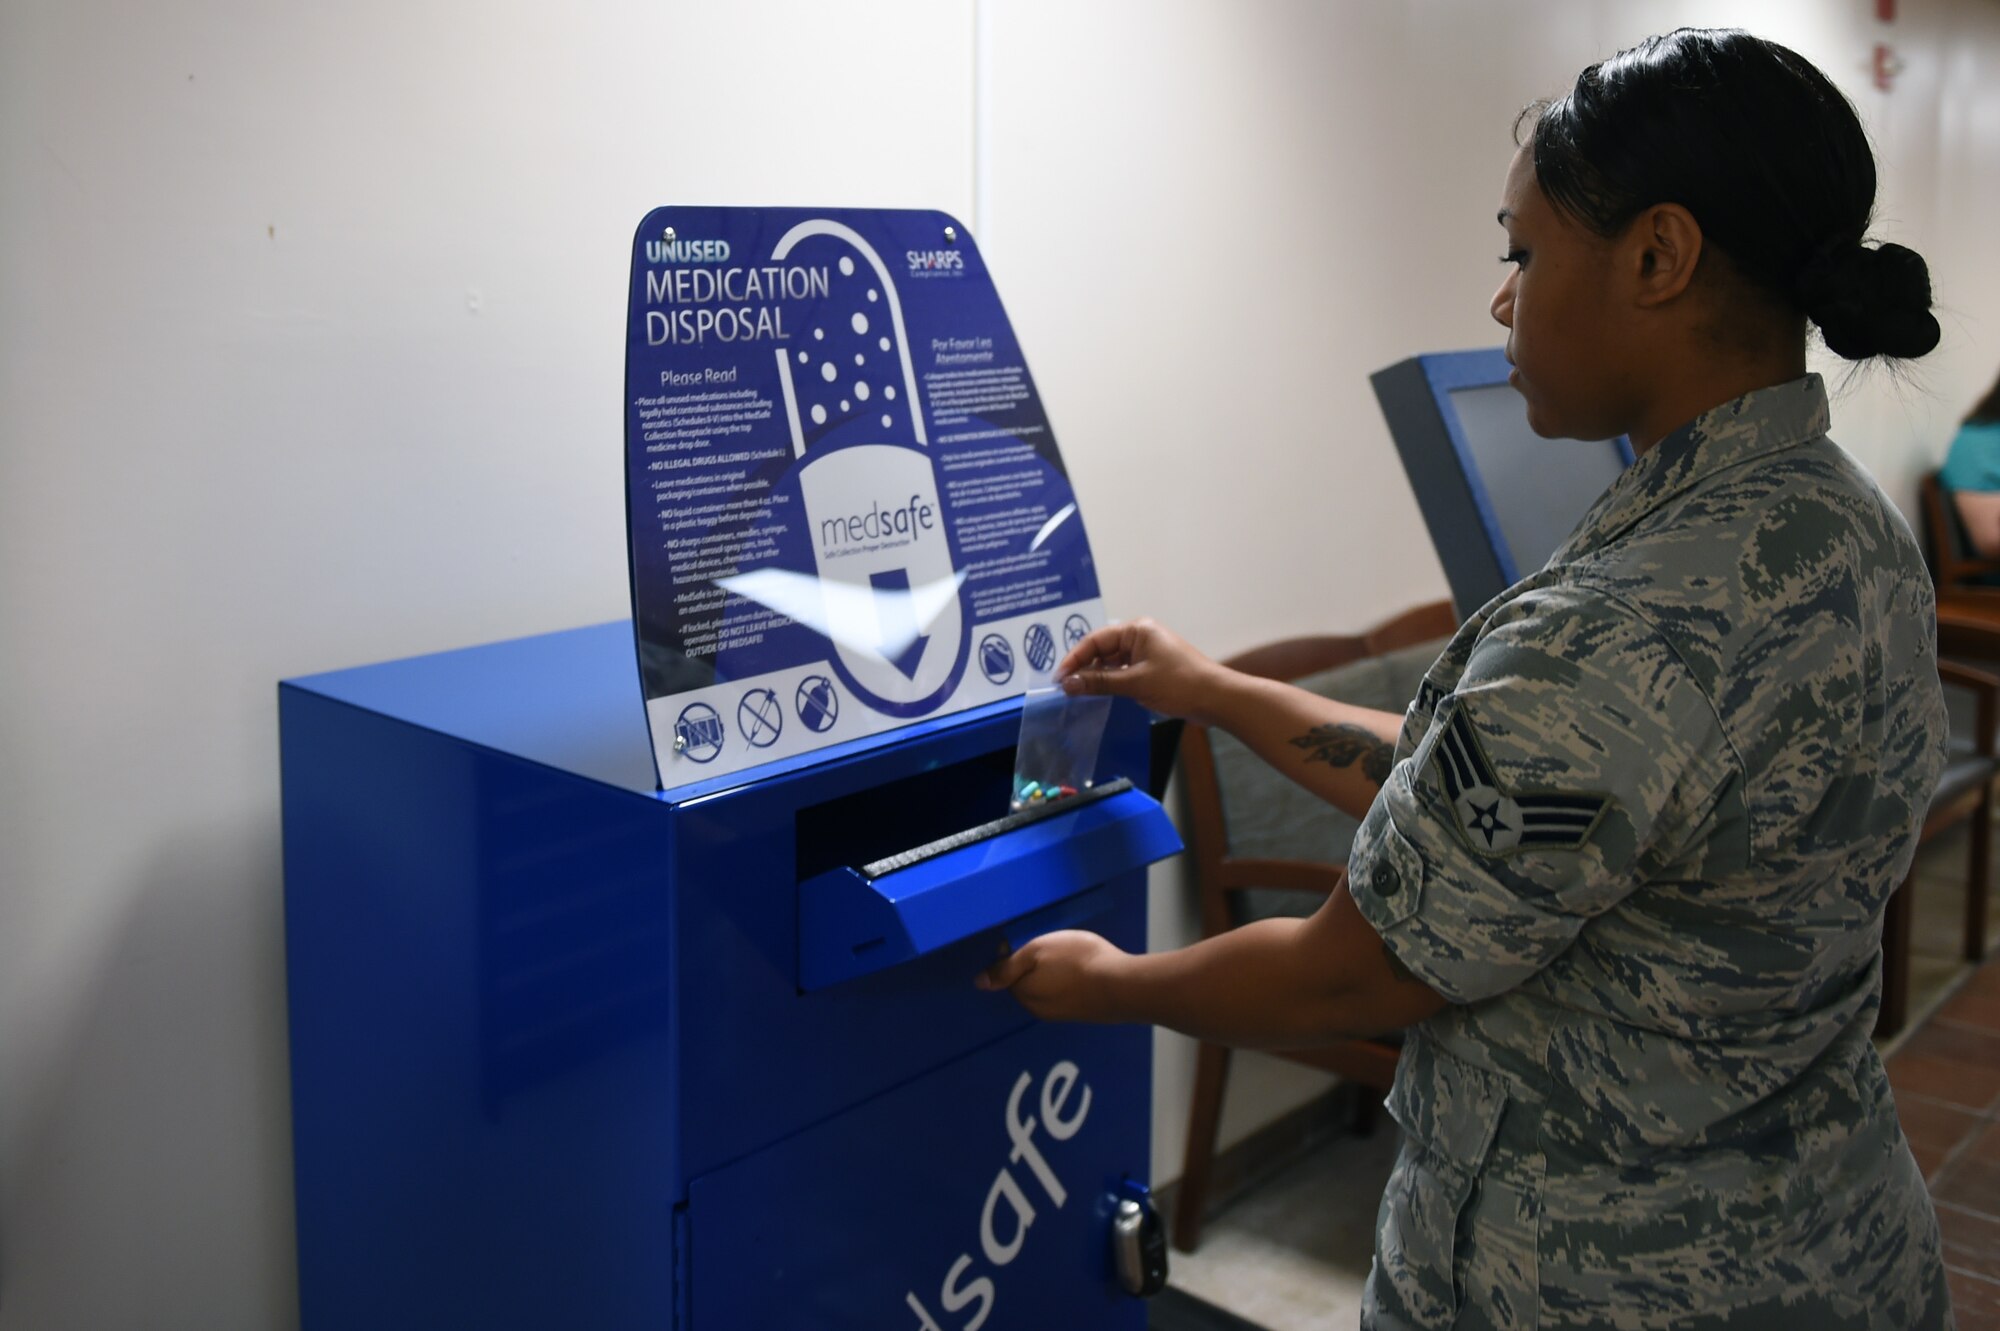 Senior Airman Sierra Steen, 59th Medical Diagnostics and Therapeutics Squadron, pharmacy tech, drops off unused medications in the MedSafe cabinet, Apr. 21, 2016, at the Wilford Hall Ambulatory Surgical Center Pharmacy lobby on Joint Base San Antonio-Lackland, Texas. Secure medicine collection cabinets are located in the WHASC lobby first floor near Seattle’s Best, in the Satellite Pharmacy lobby and at the Reid Clinic just outside the pharmacy. (U.S. Air Force photo/Staff Sgt. Jason Huddleston)